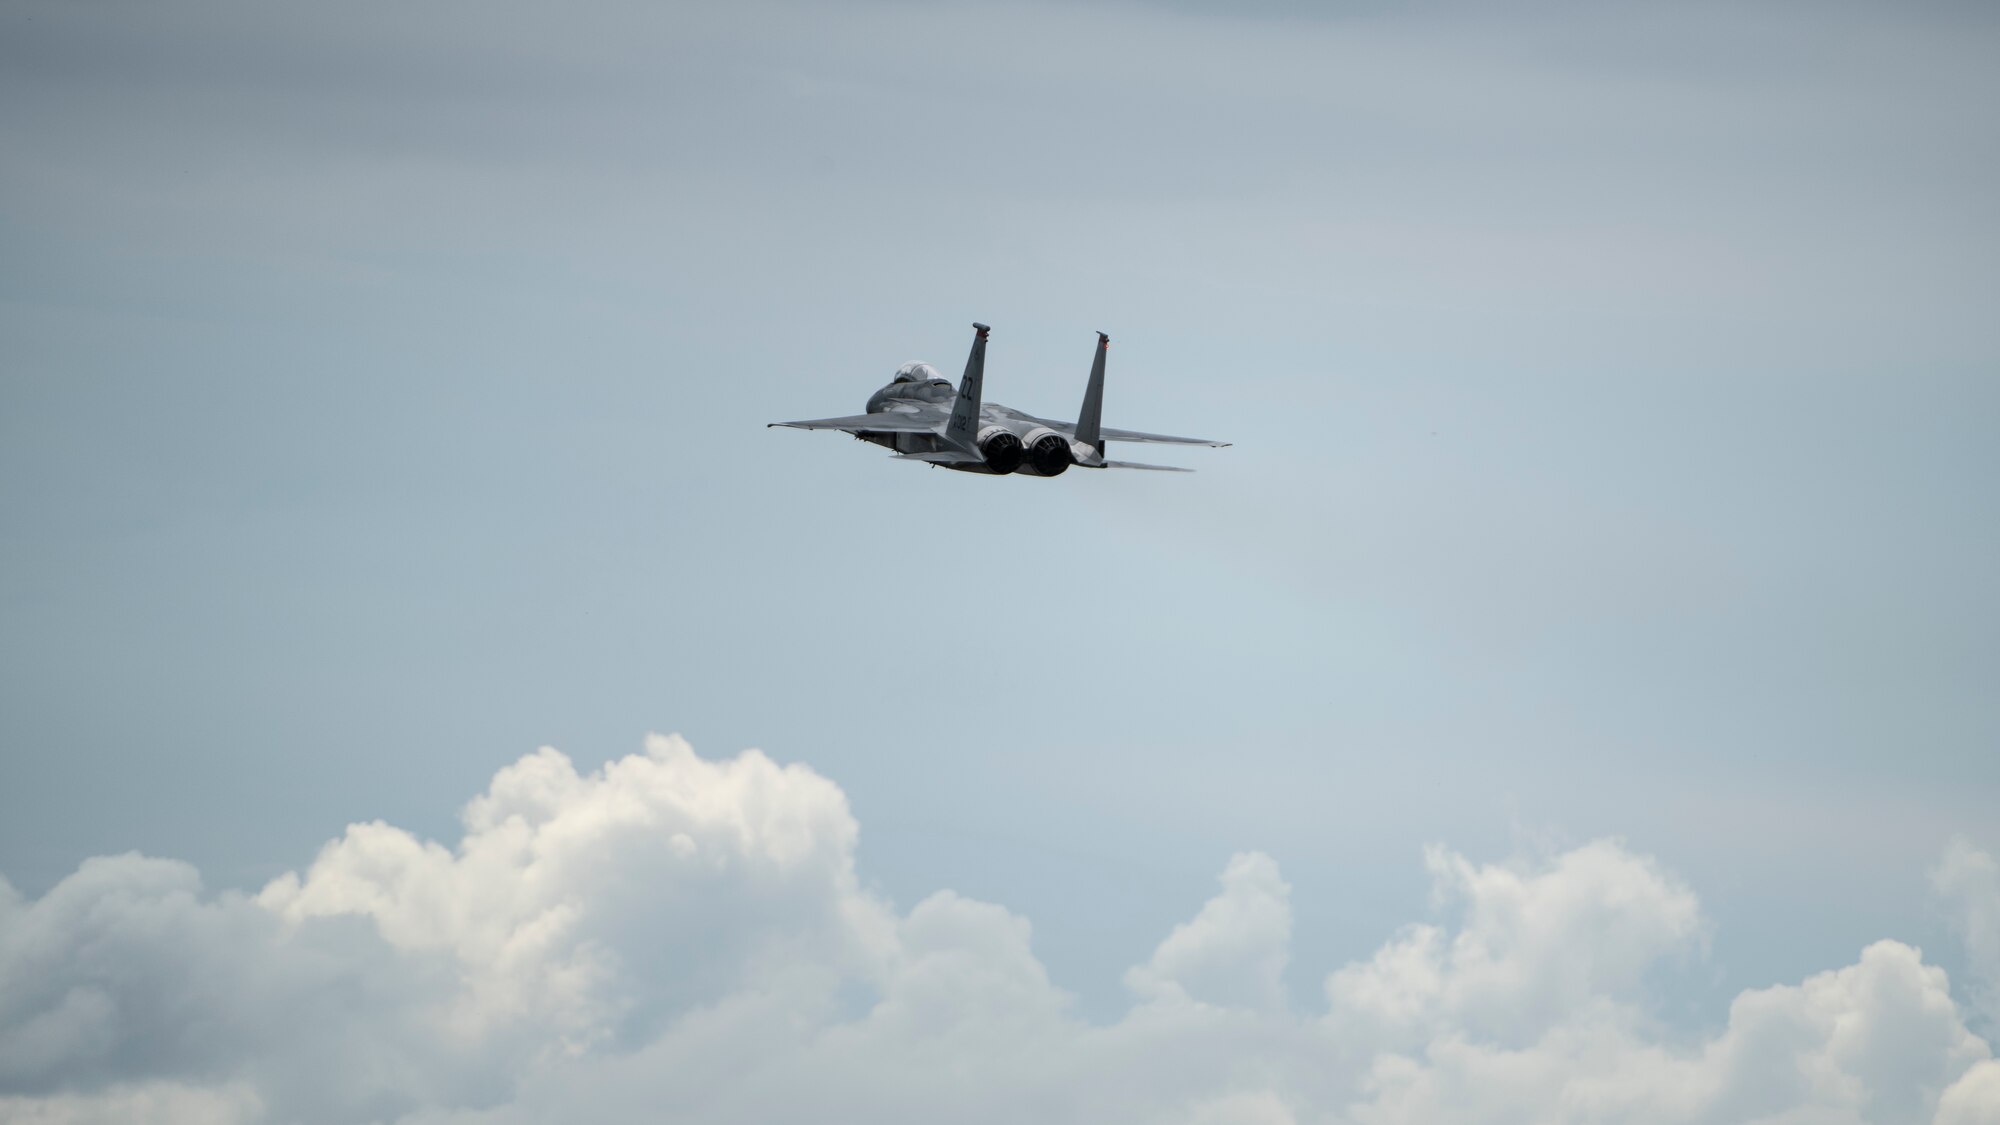 A U.S. Air Force 67th Fighter Squadron F-15C Eagle departs for a training mission Sept. 14, 2020, at Kadena Air Base, Japan. Team Kadena pilots train every day to ensure readiness and mission effectiveness to support a free and open Indo-Pacific.